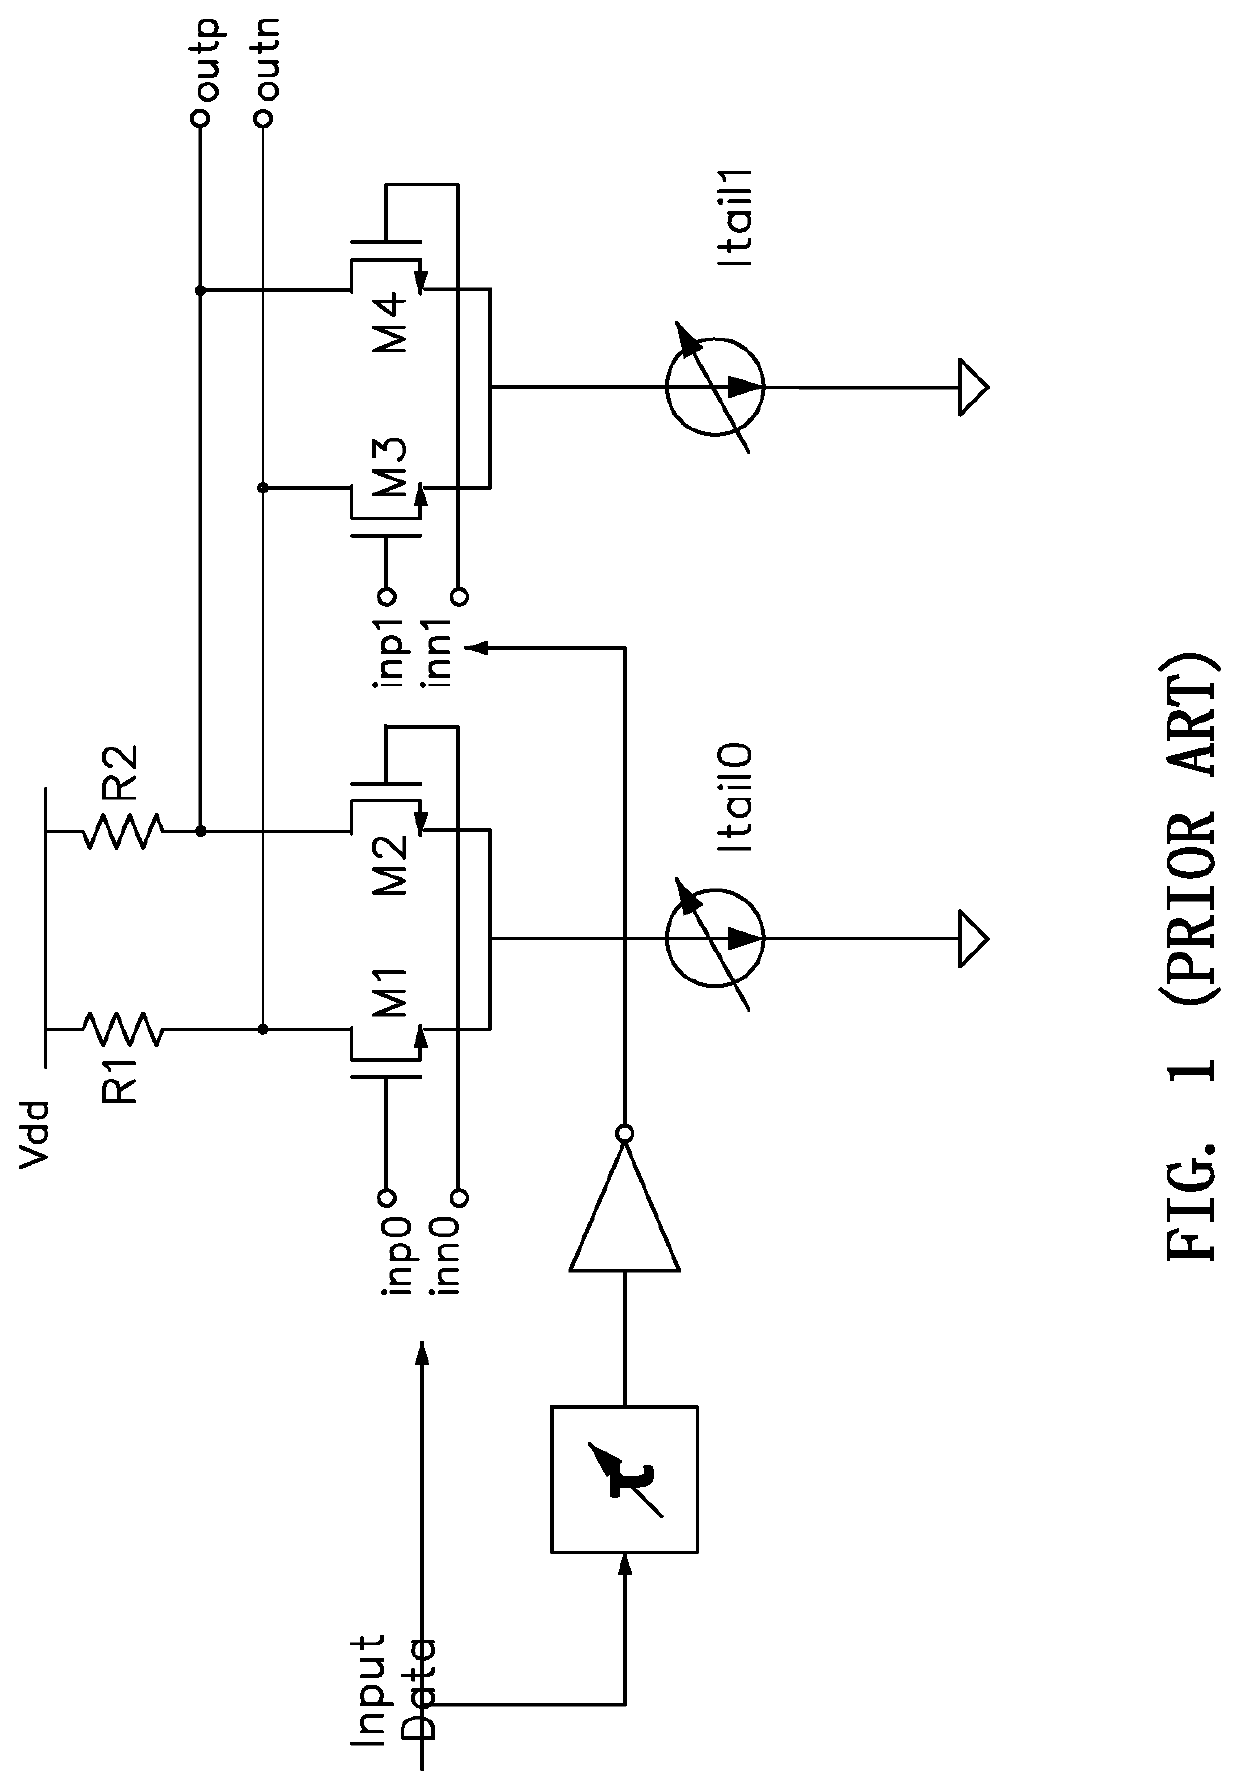 Balancing circuit capable of compensating bandwidth attenuation introduced by interference between signals